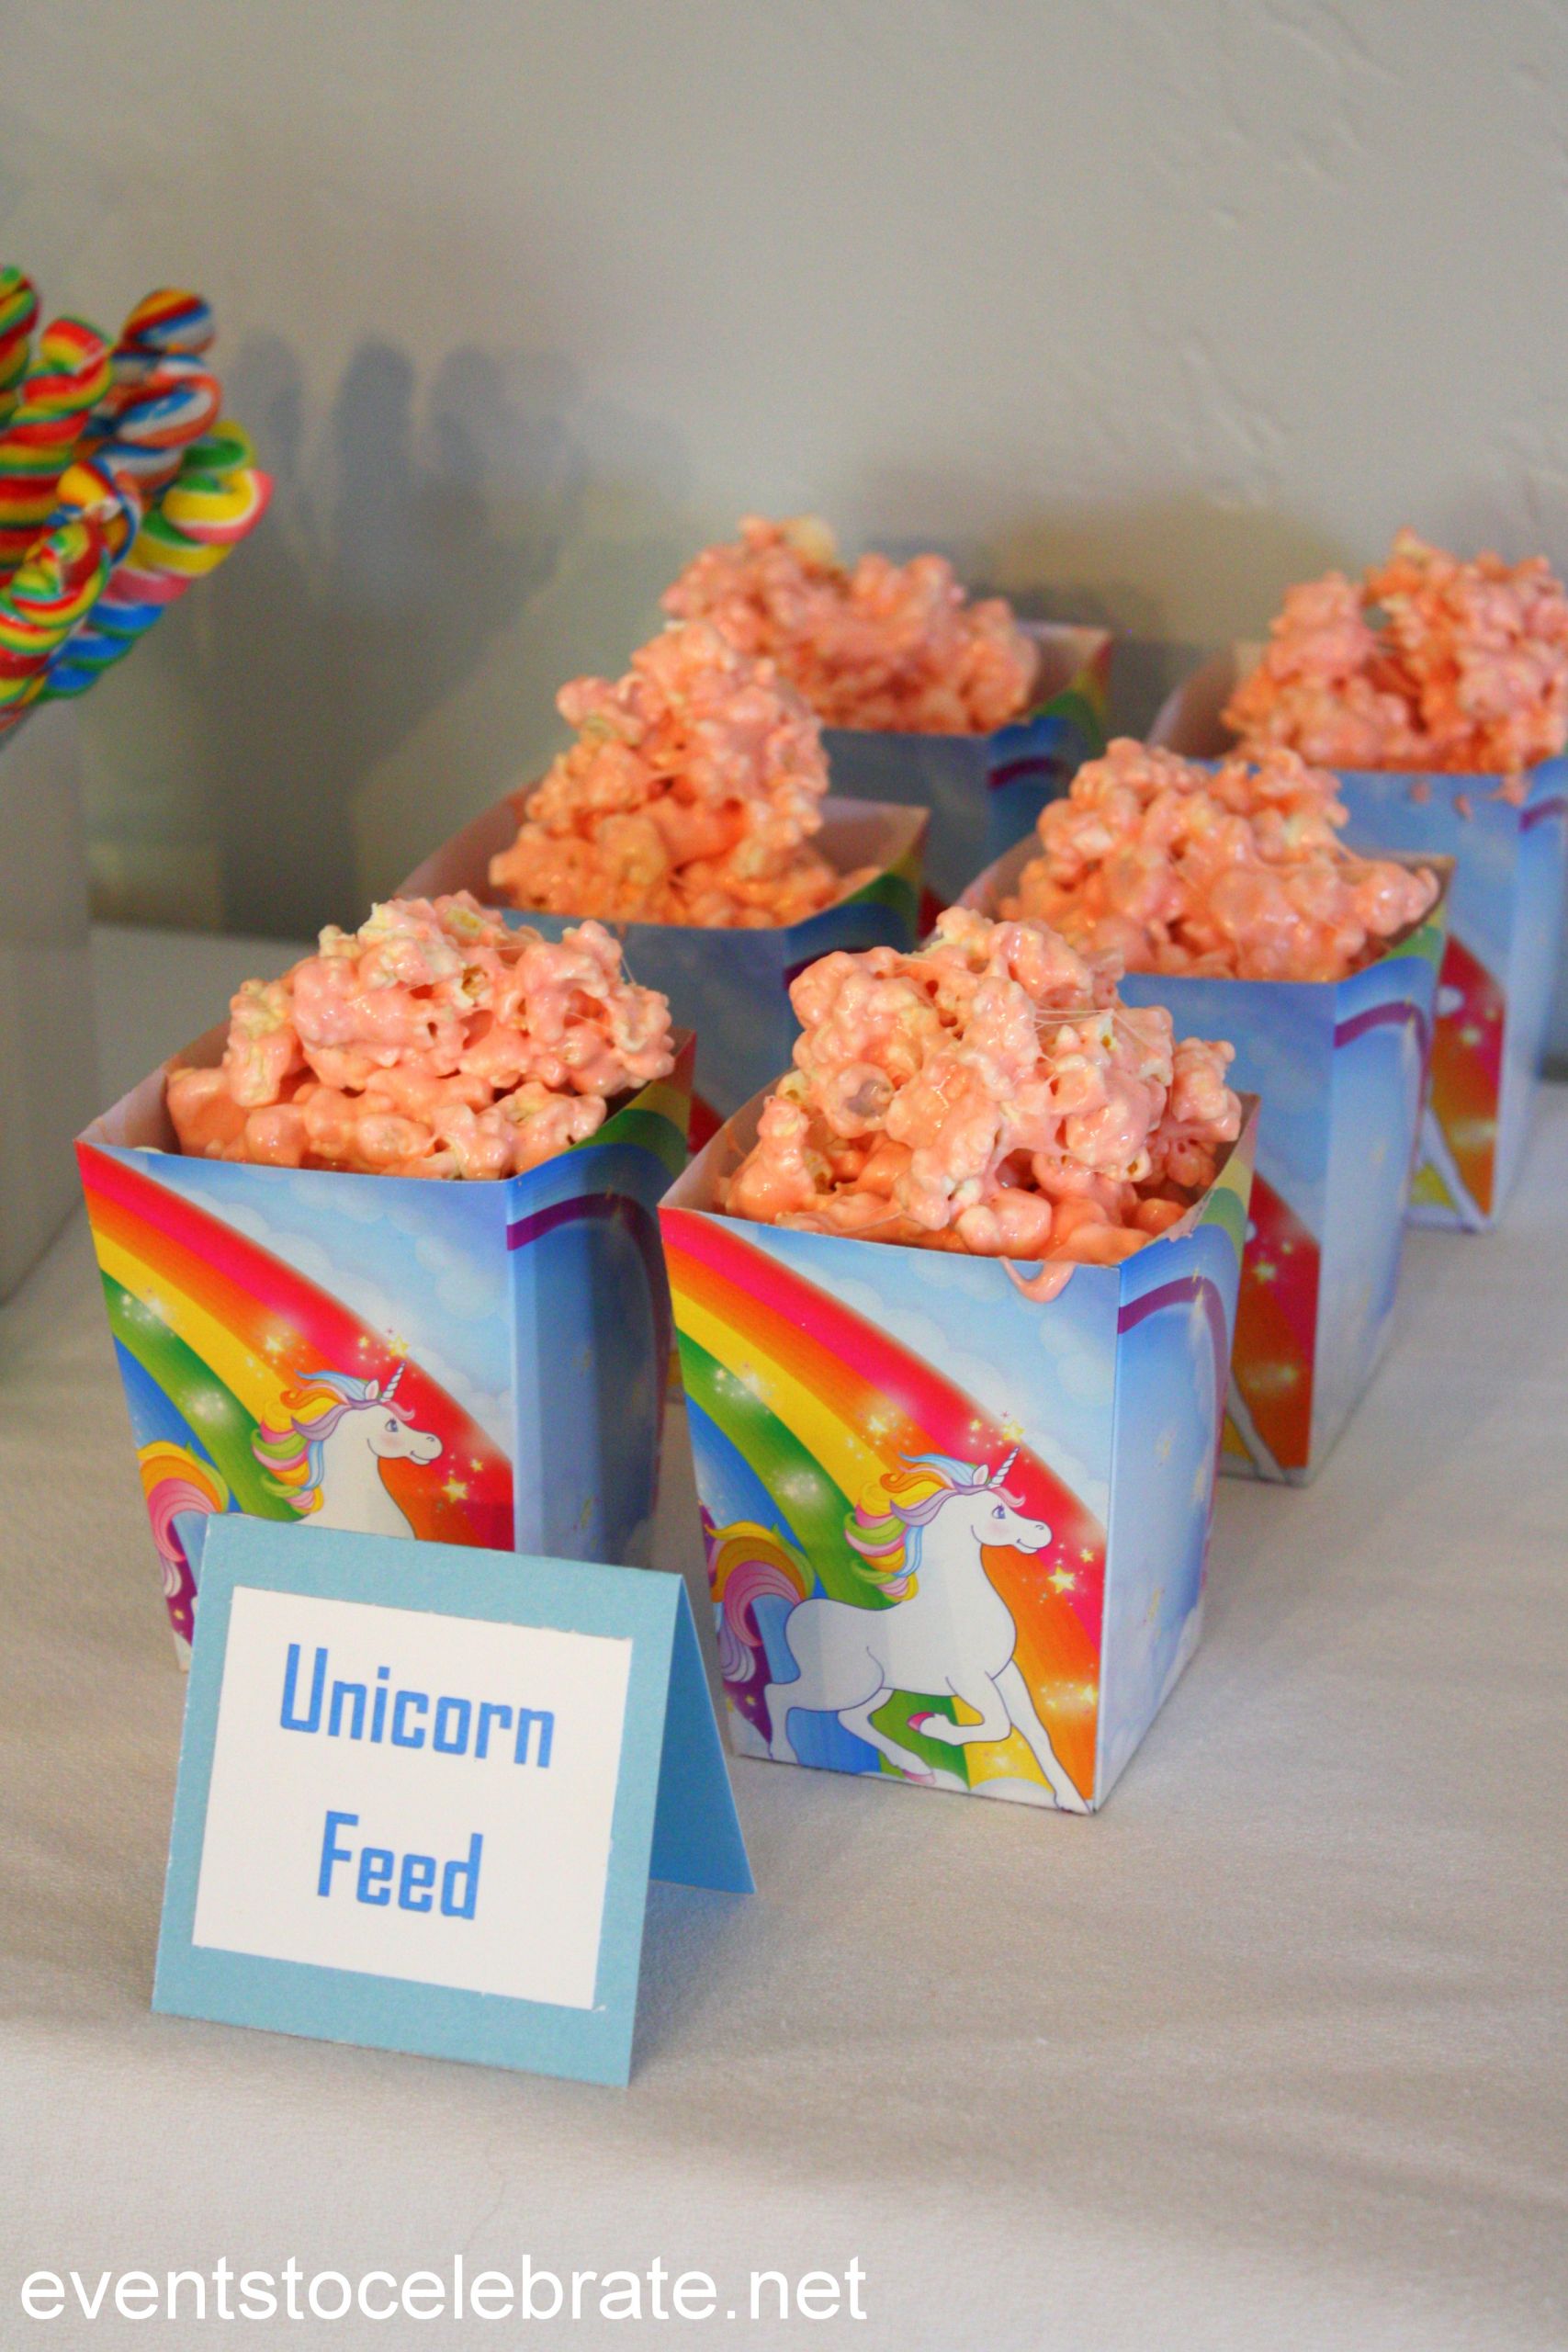 Unicorn Party Ideas Food
 Unicorn Party Decorations and Food